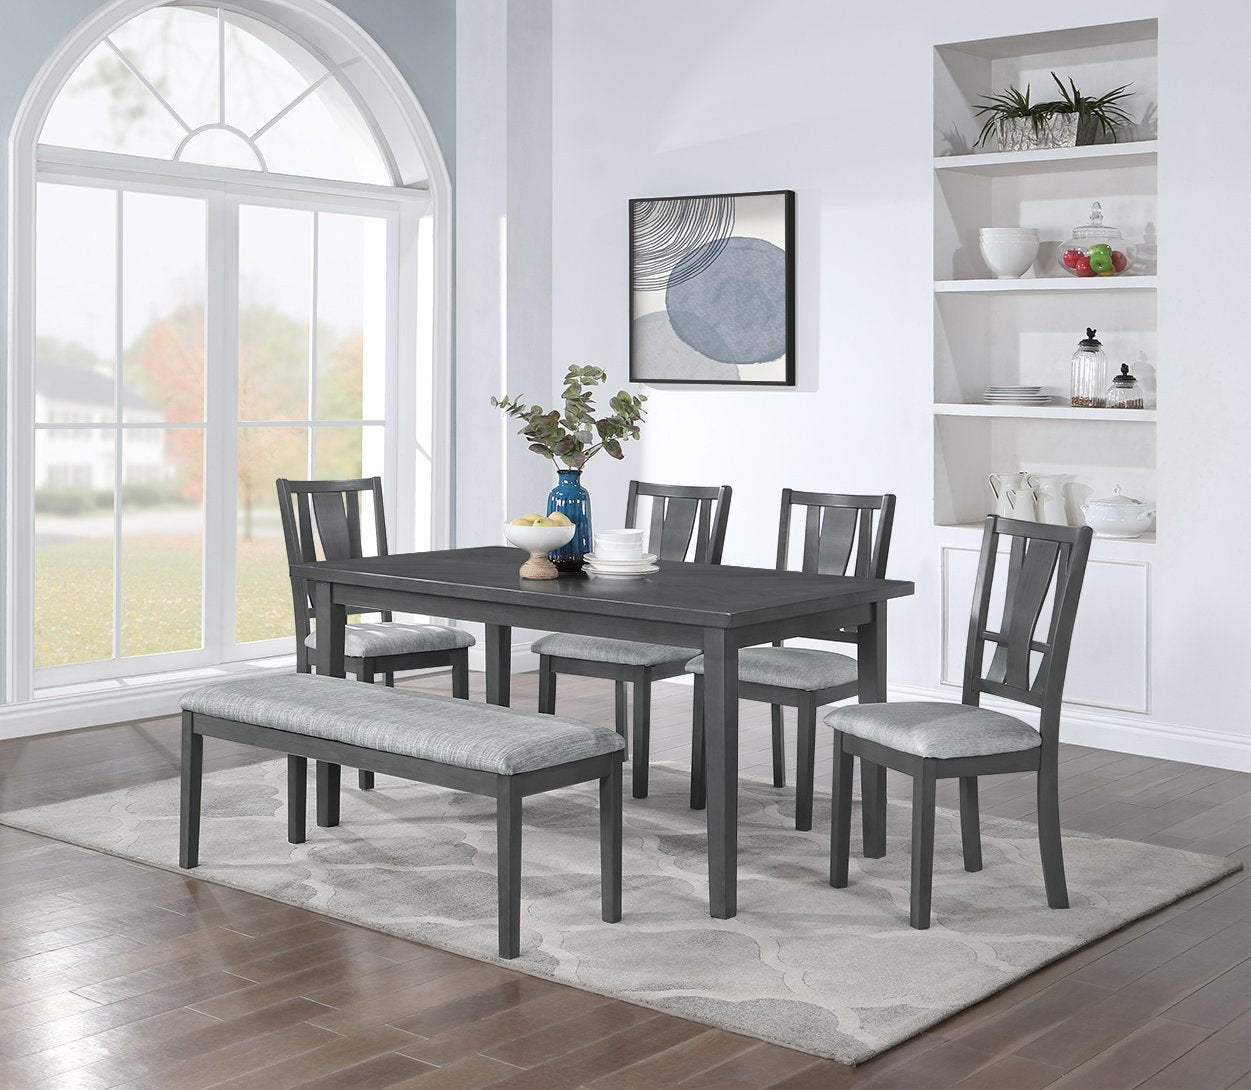 6-piece Outdoor Dining Set with Bench, Gray - Tuesday Morning-Dining Sets